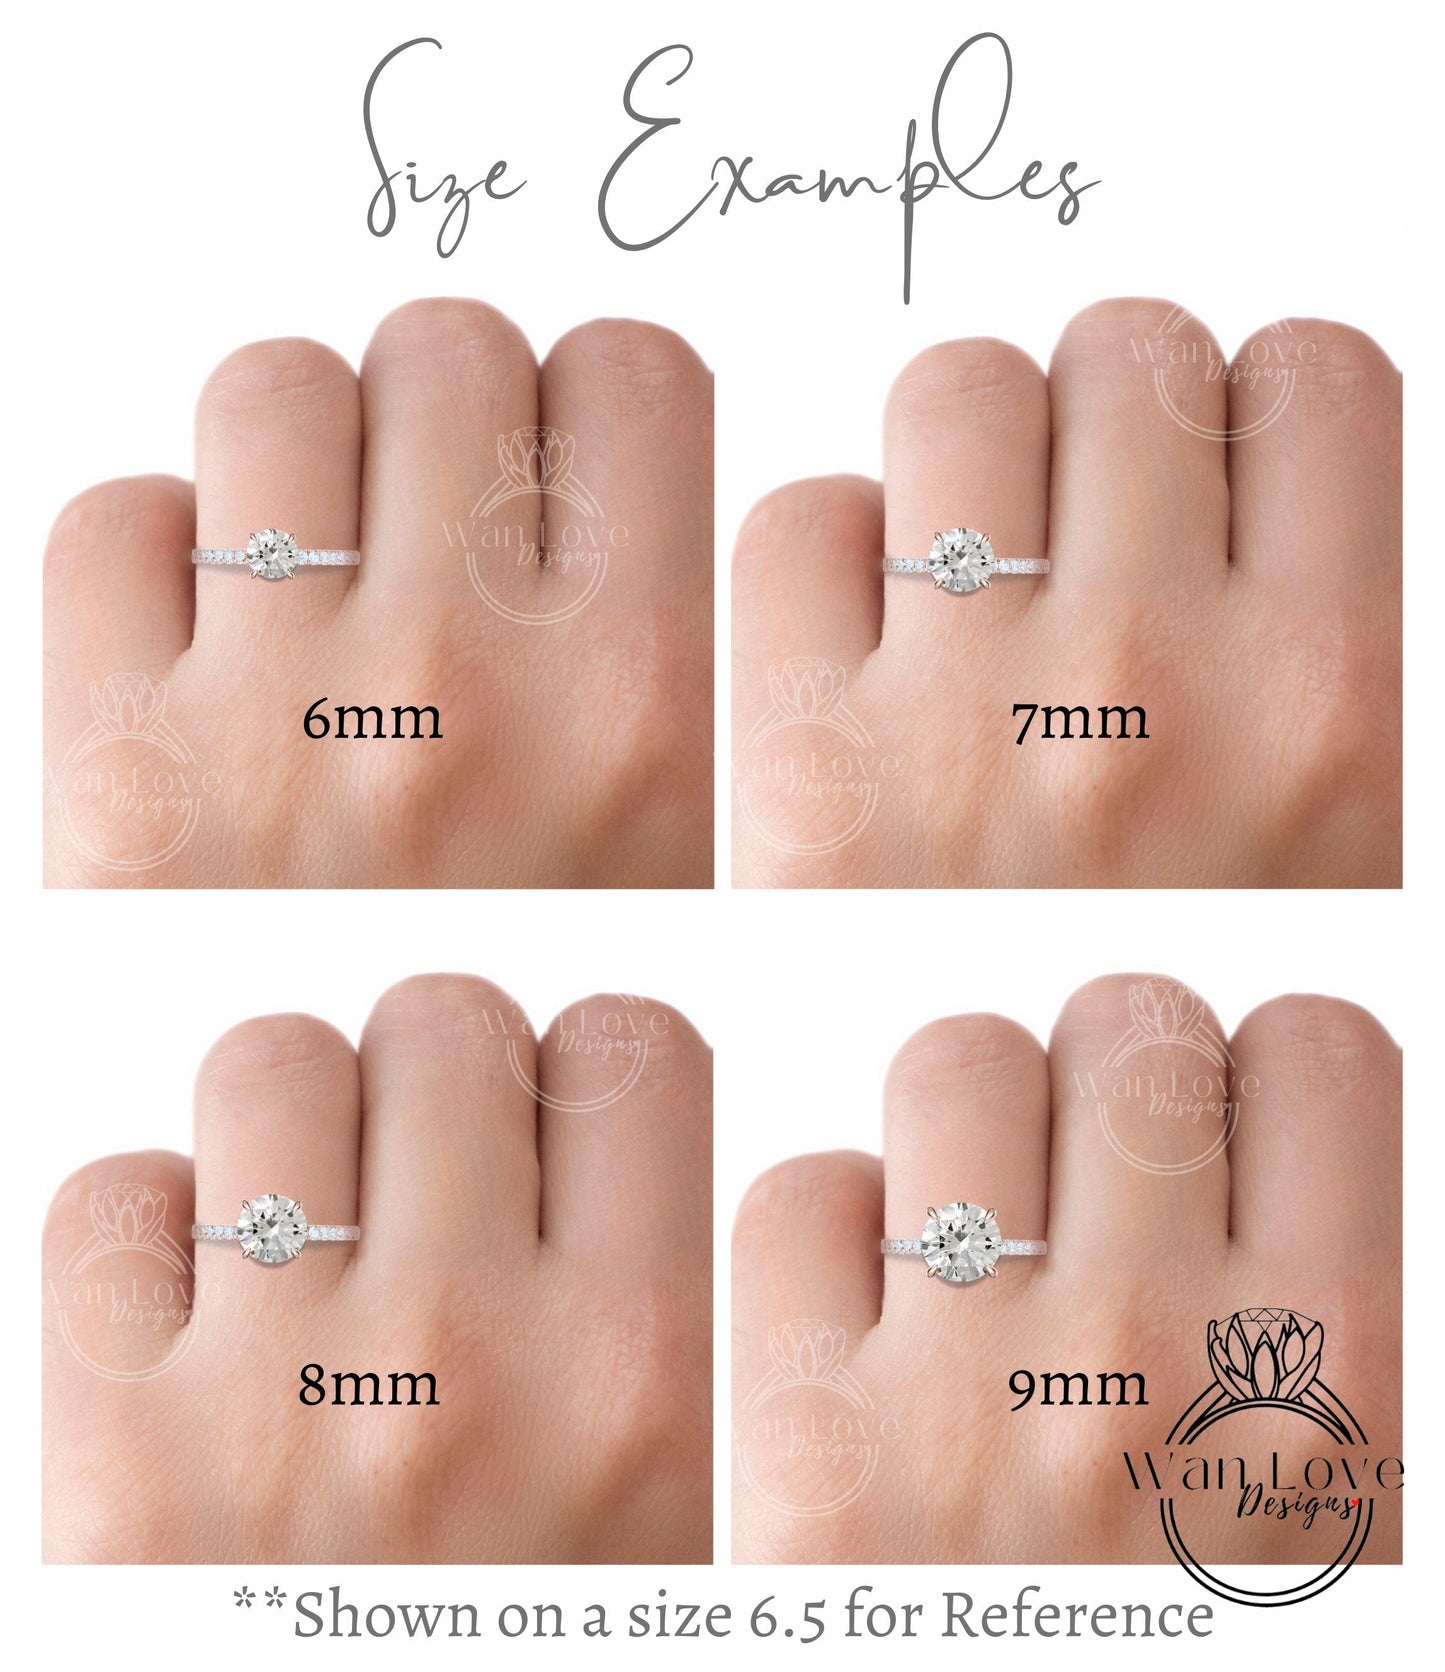 Moissanite engagement ring 4 prong Solitaire tapered ring white gold ring round cut ring vintage ring art deco ring moissanite promise ring Wan Love Designs